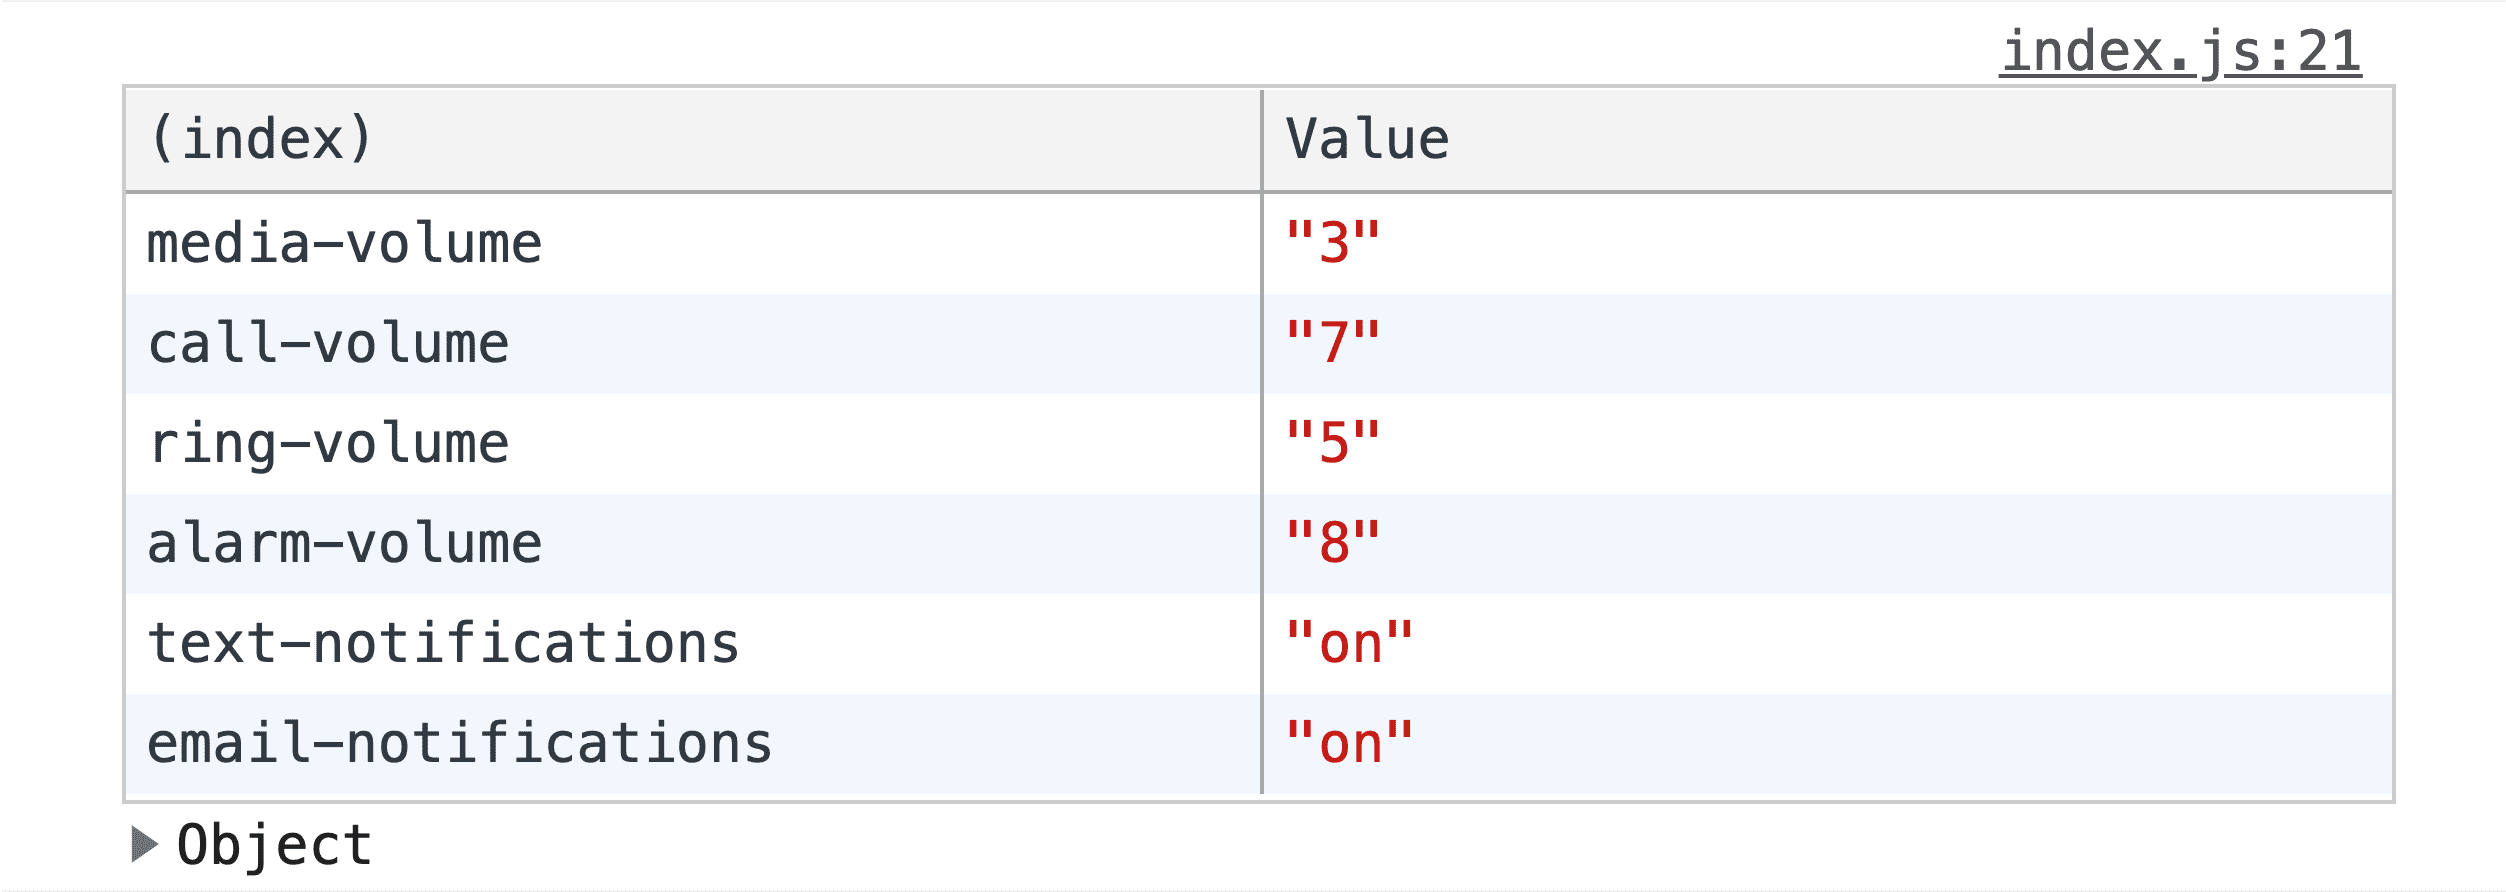 A screenshot of the console.table() results, where the form data is shown in a table